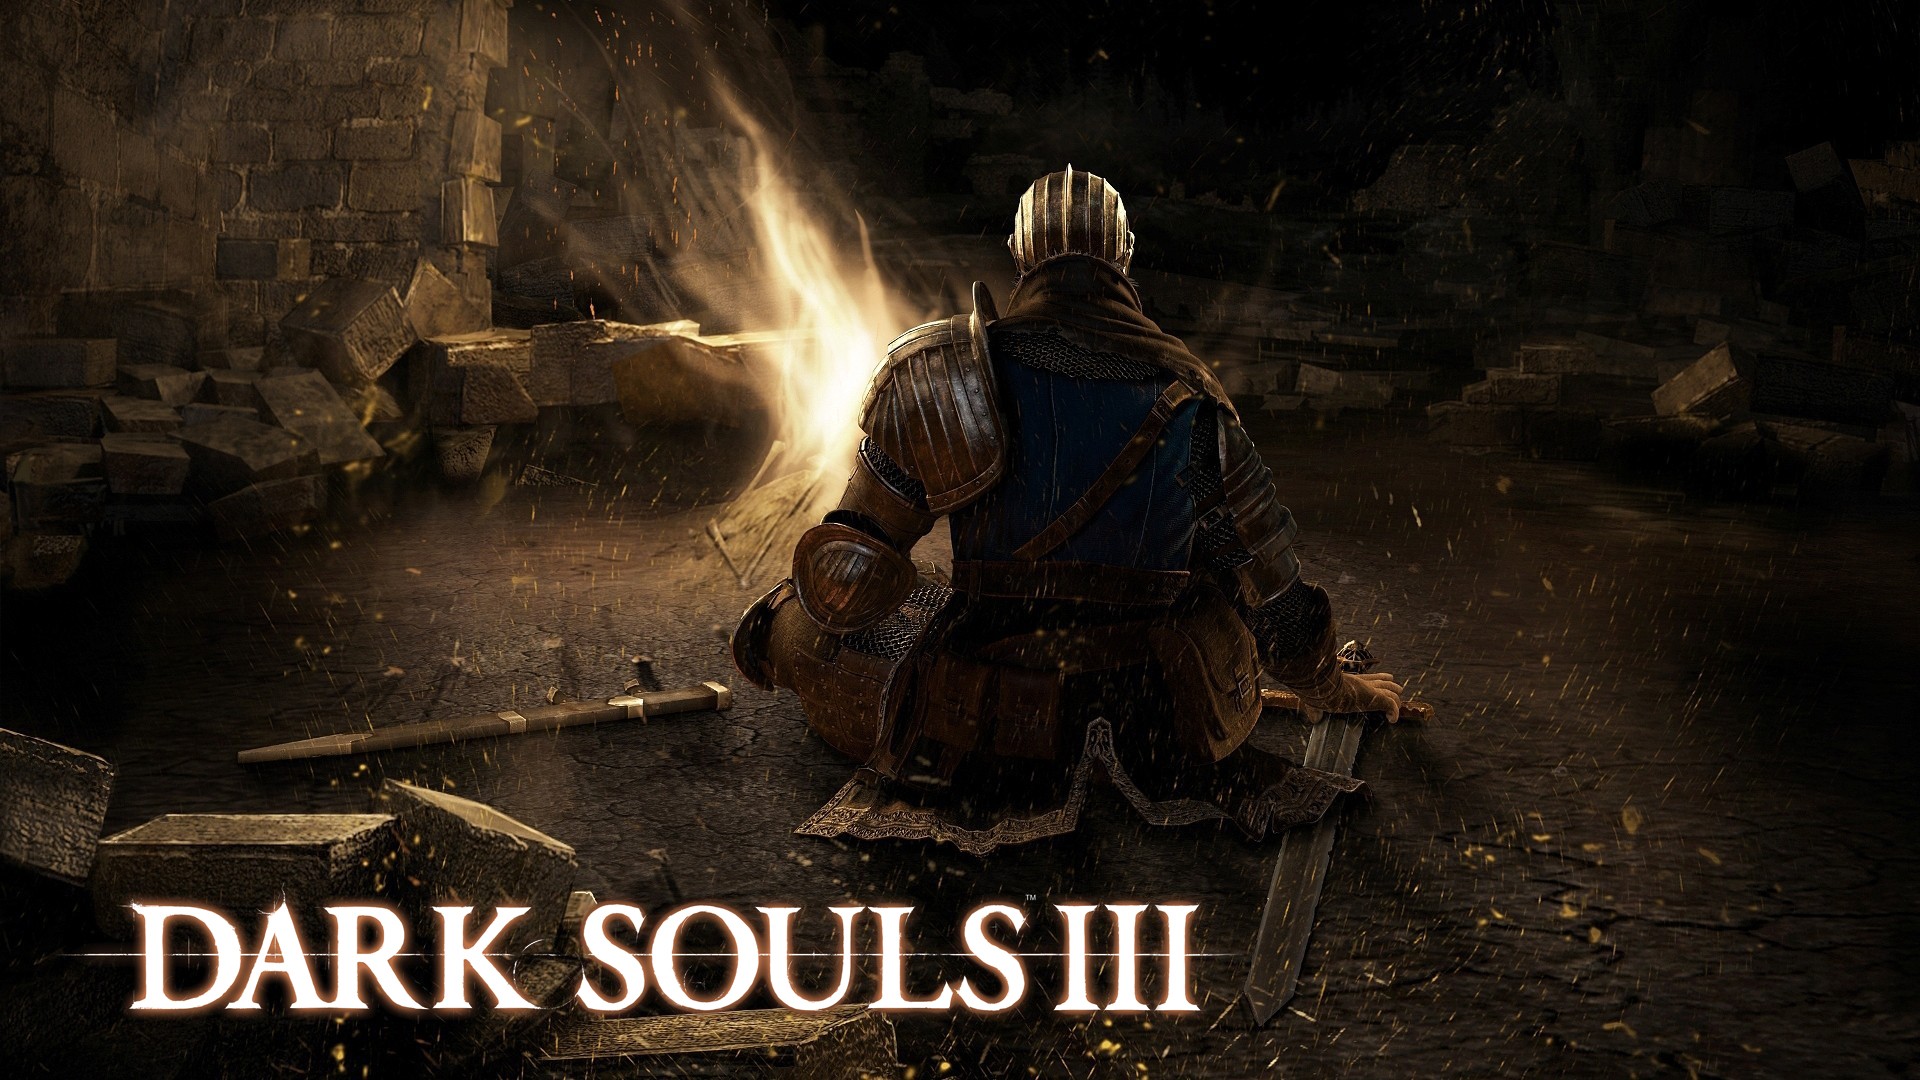 General 1920x1080 video games From Software video game art Dark Souls knight bonfires